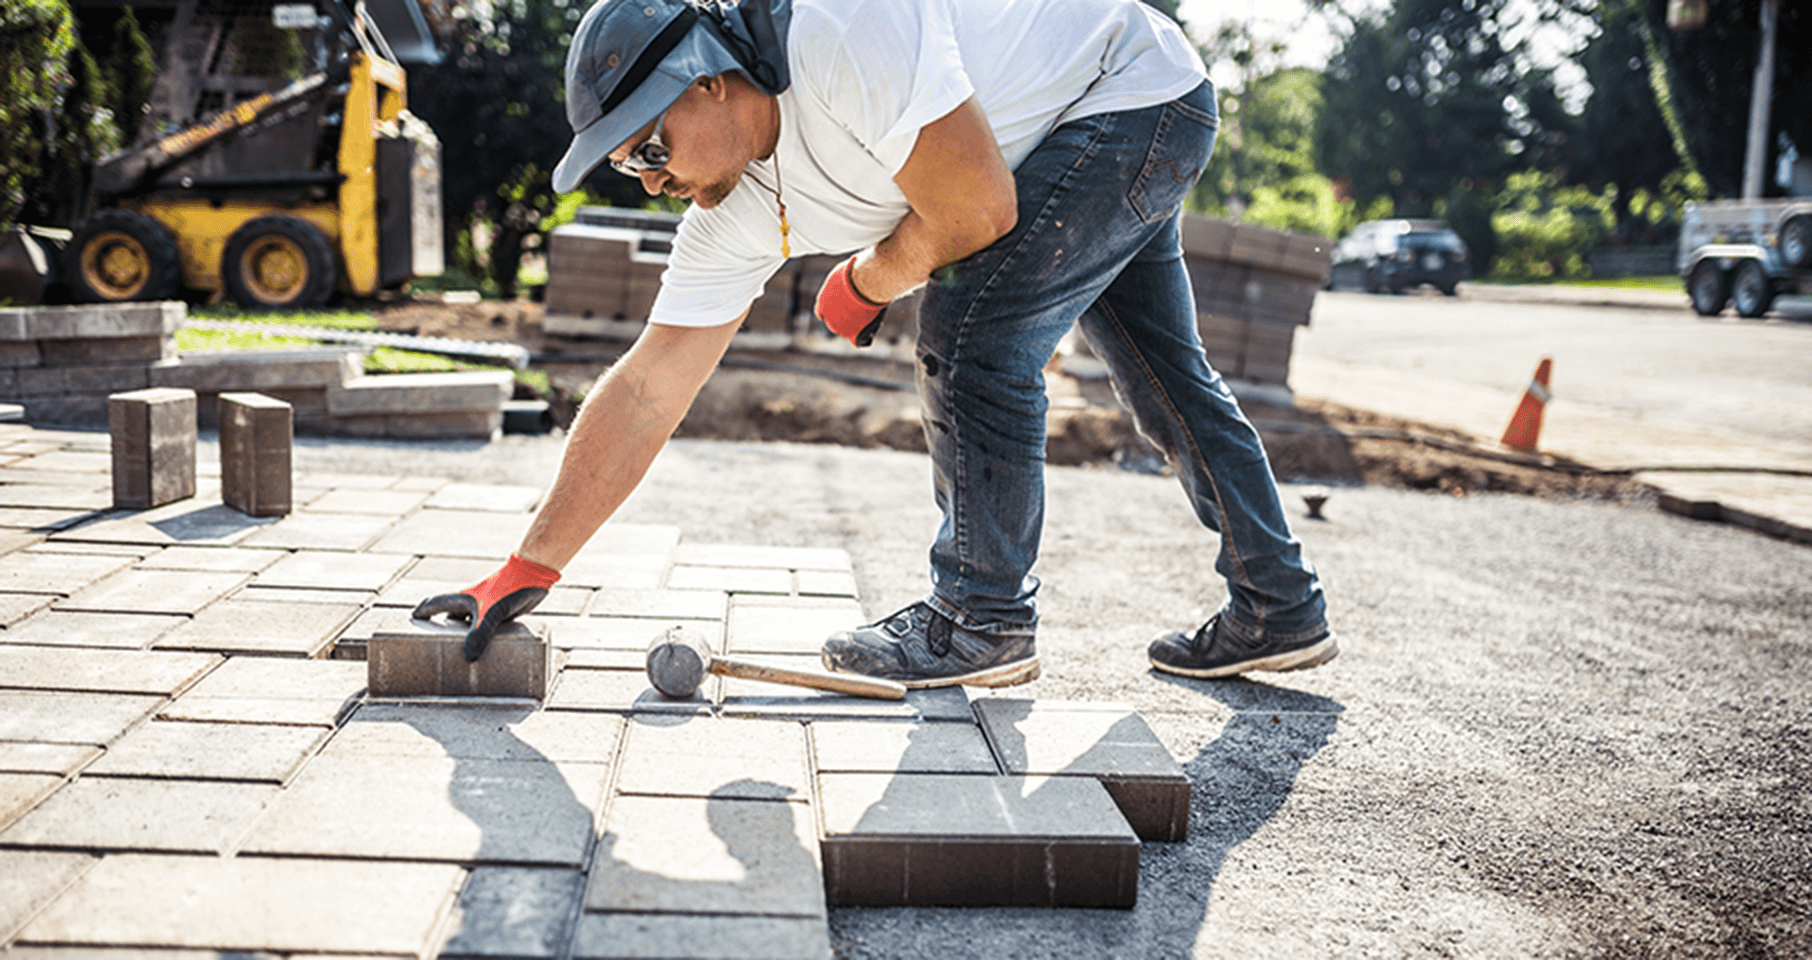 How To Install Pavers: Step-by-Step Guide